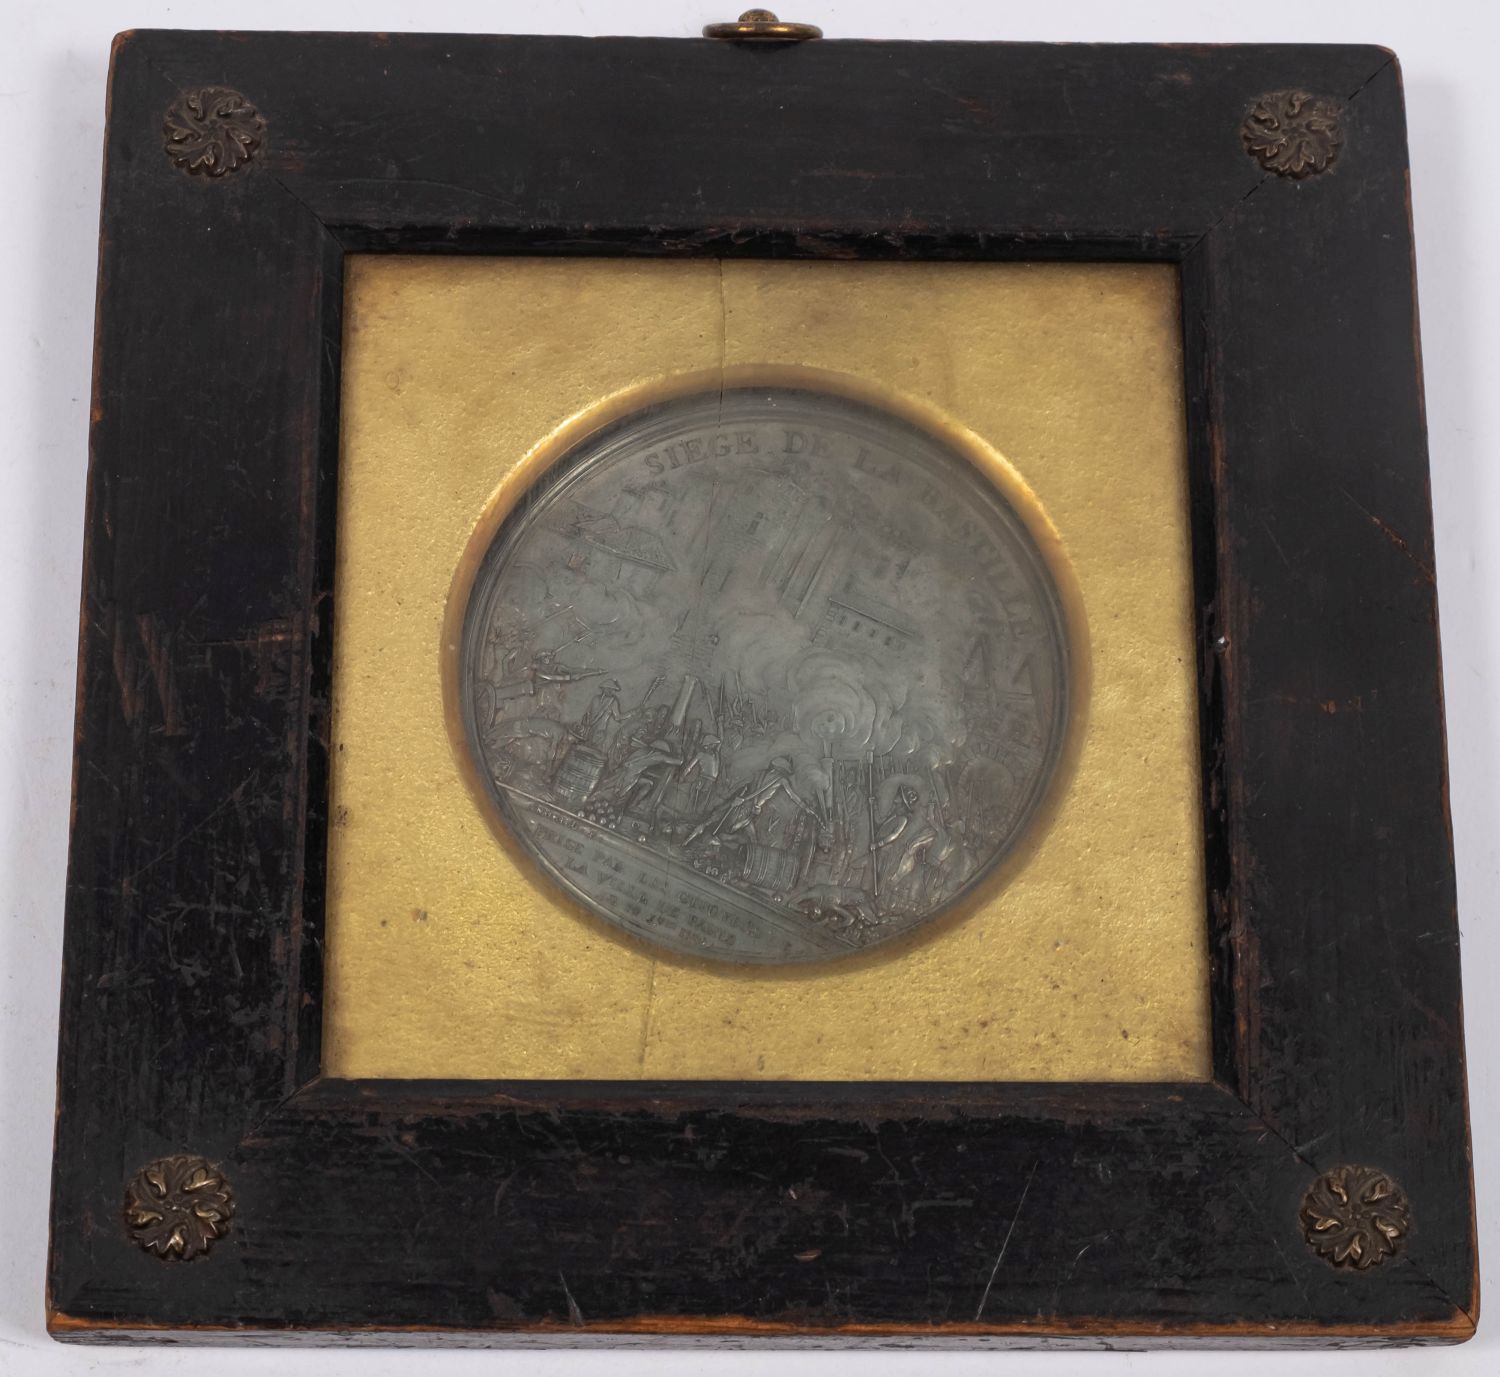 An 18th century alloy single sided 'Siege De La Bastille' medallion after Andrieu mounted in an